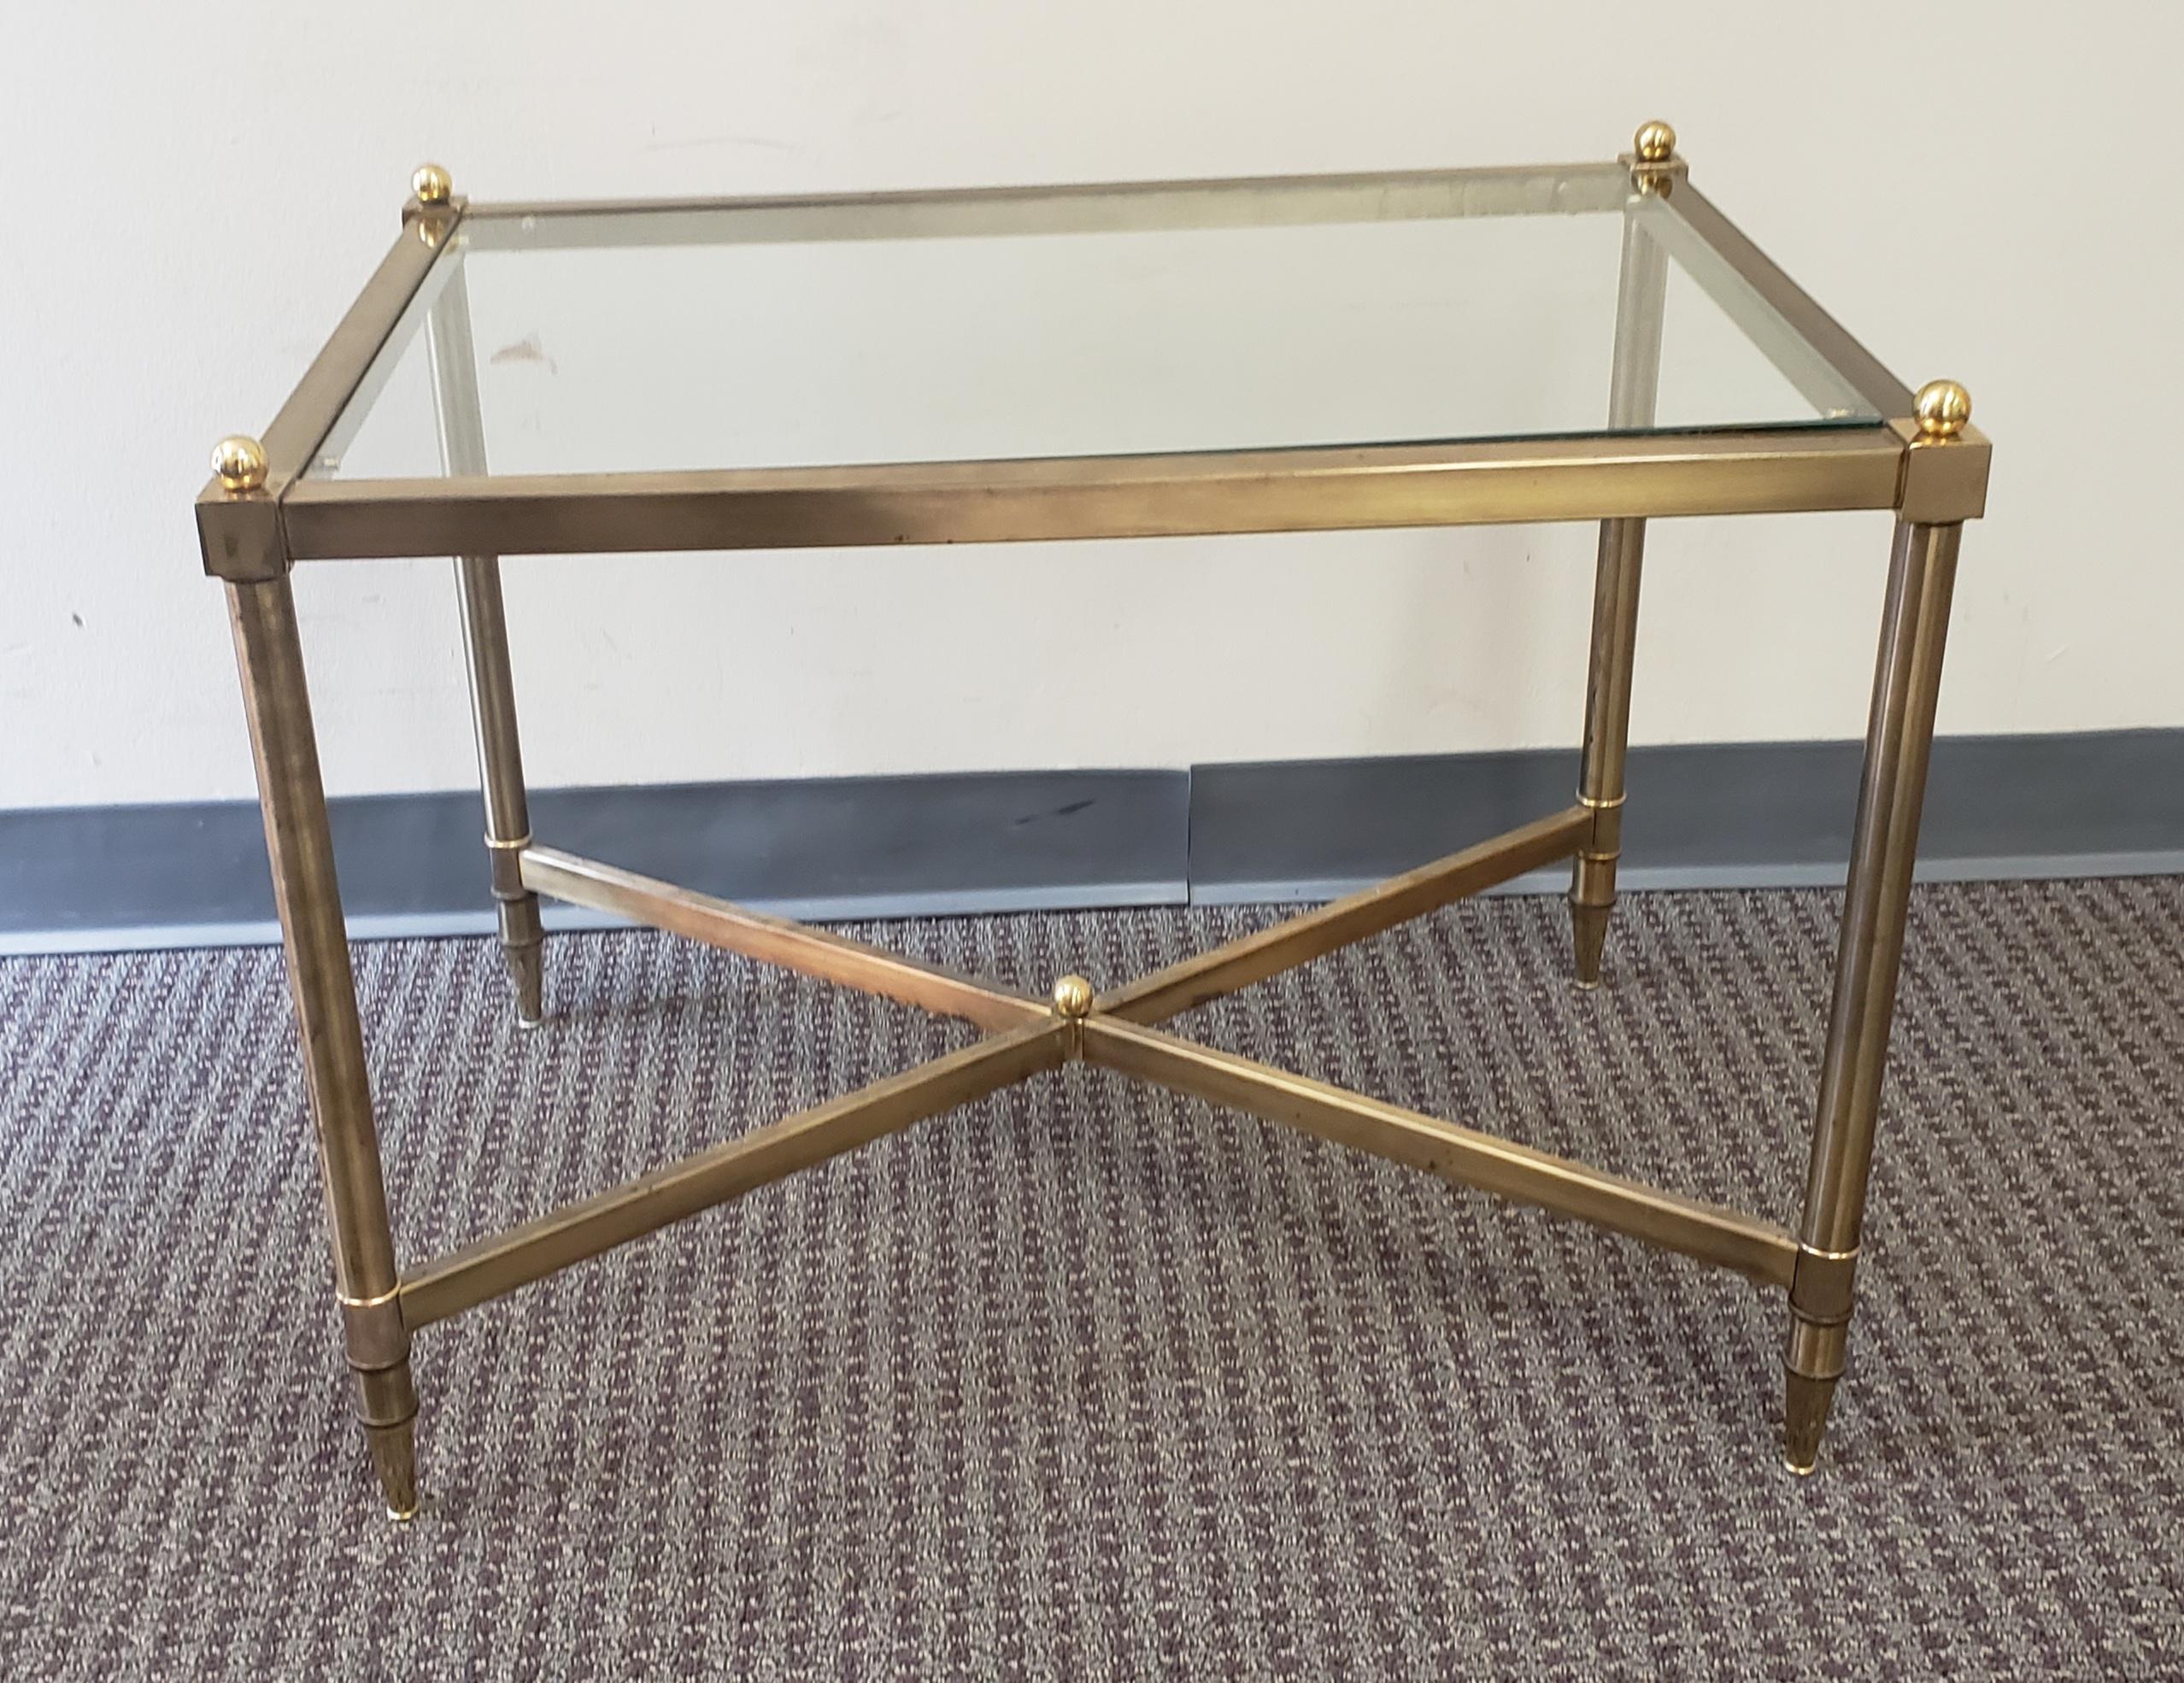 American Maison Jansen Style Rectangular Brass and Glass Top Stretcher Base Side Tables